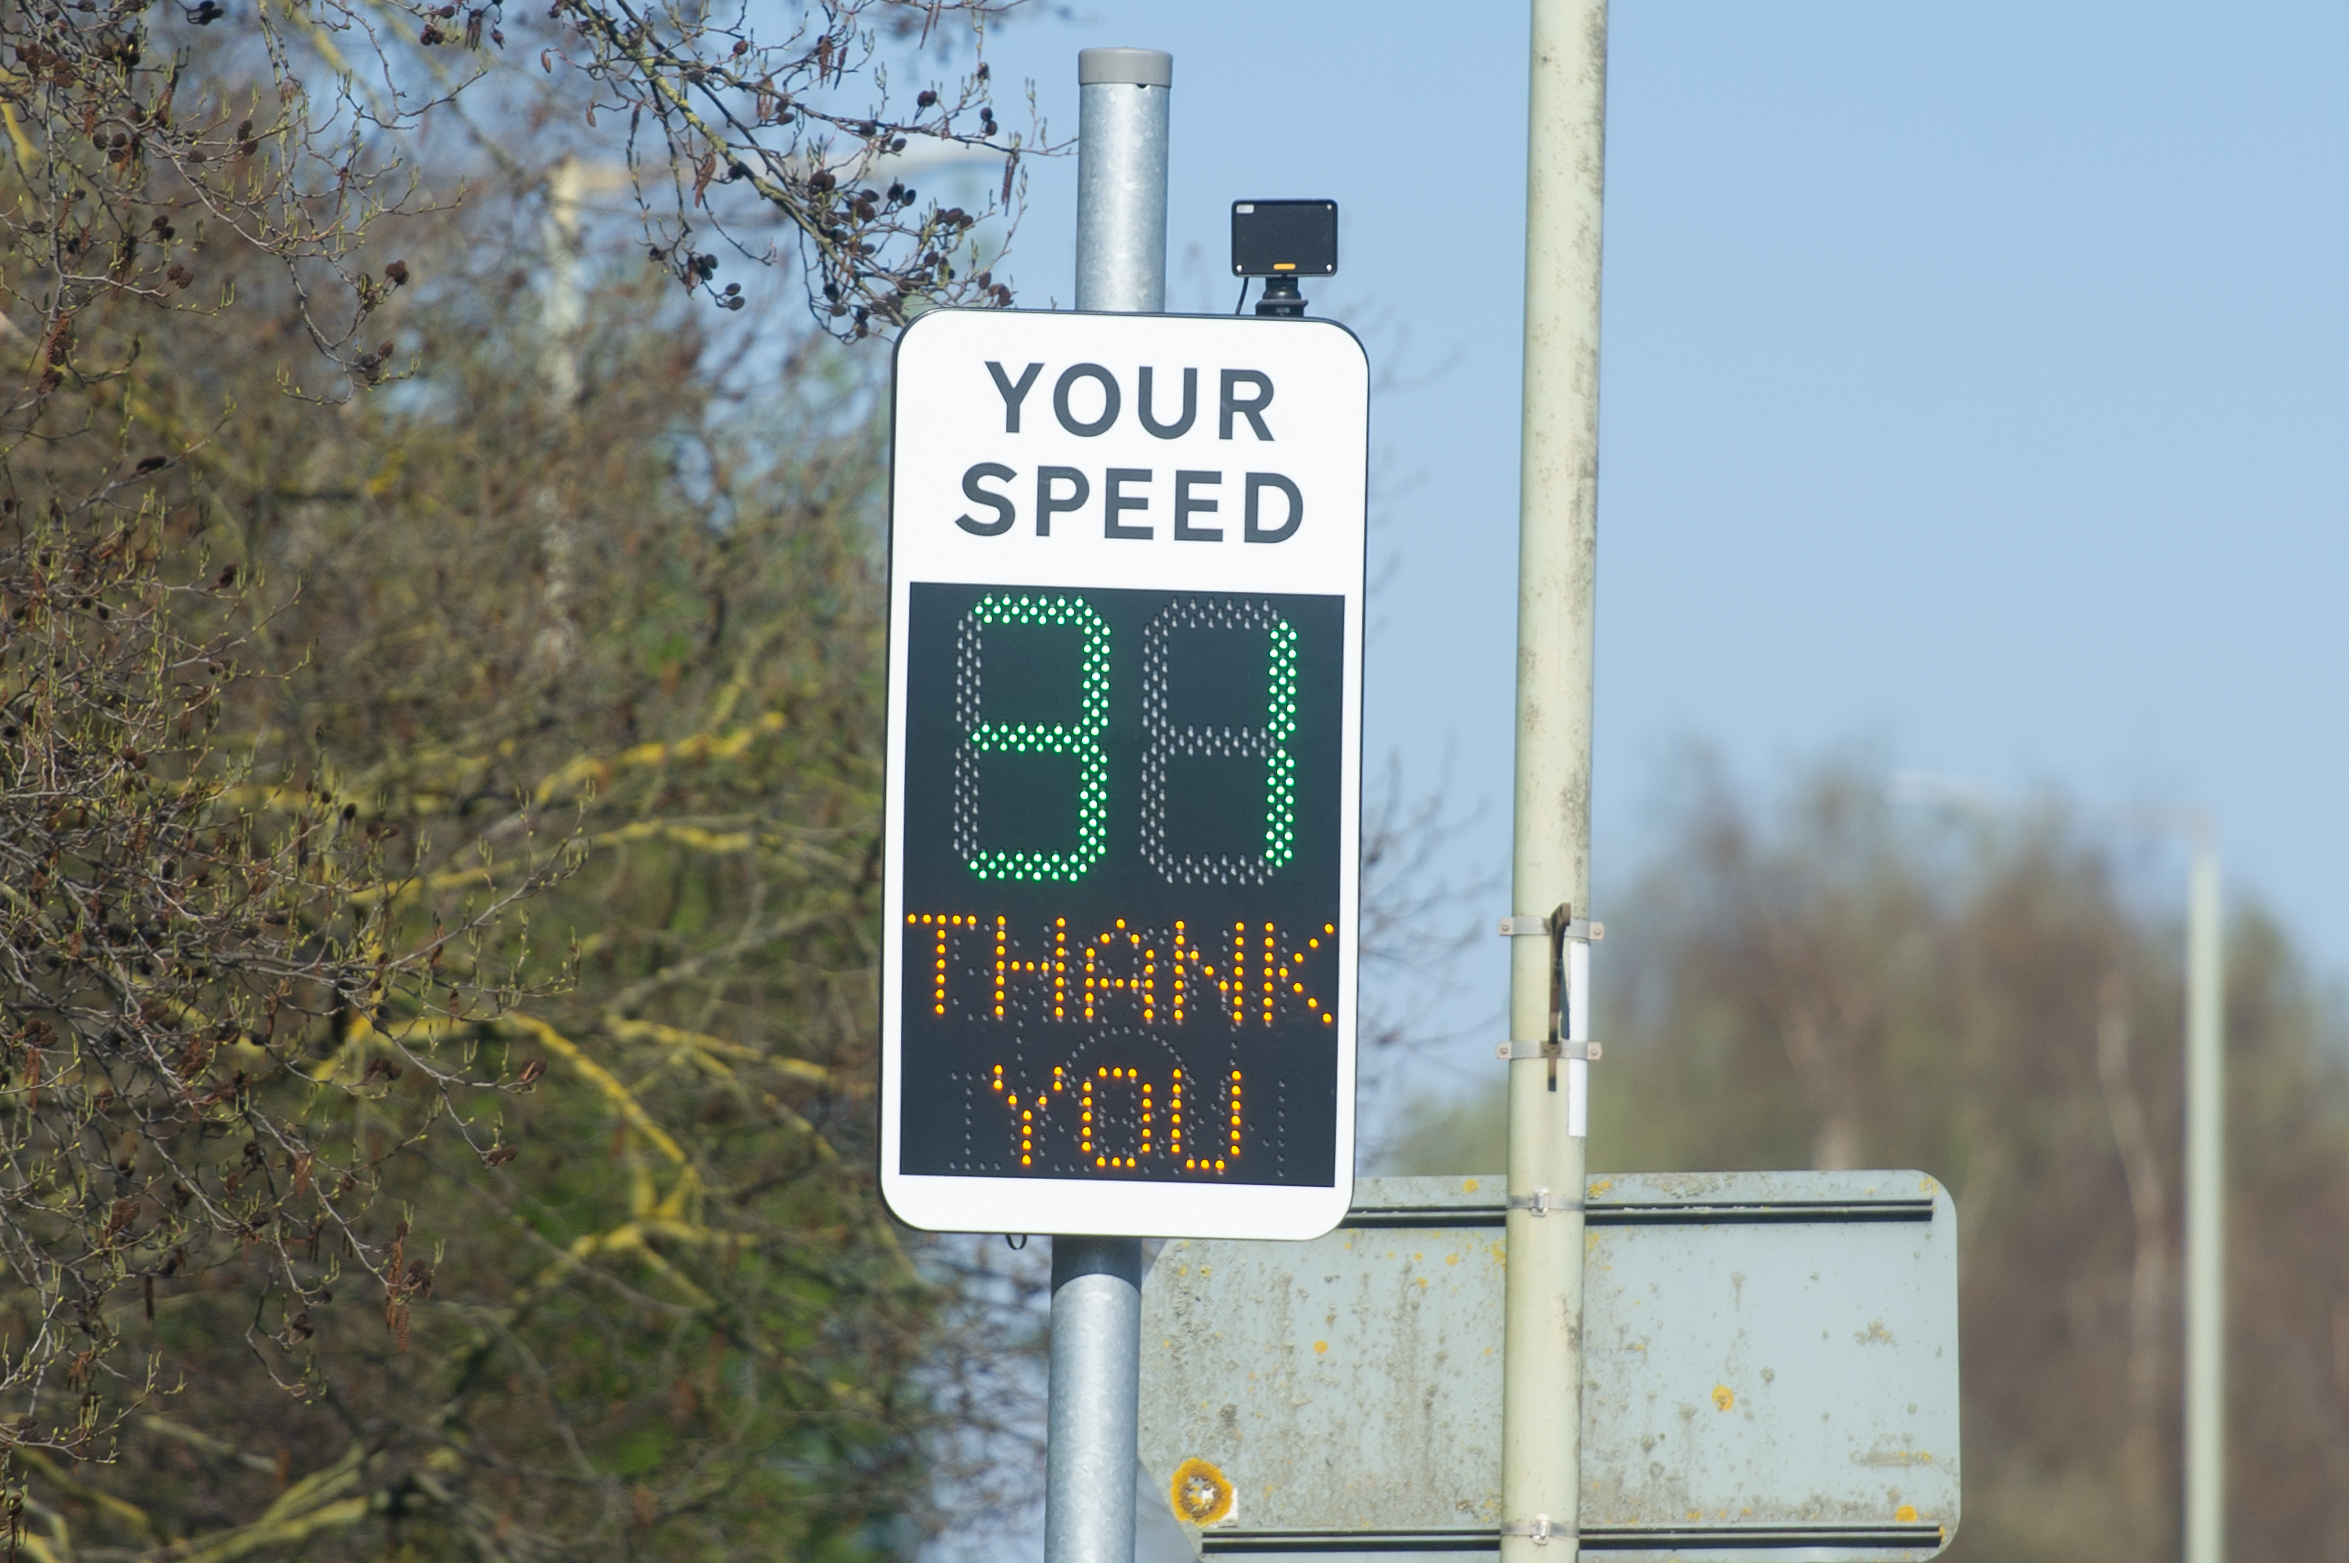 There are hopes more speed warning signs will be installed across Angus.